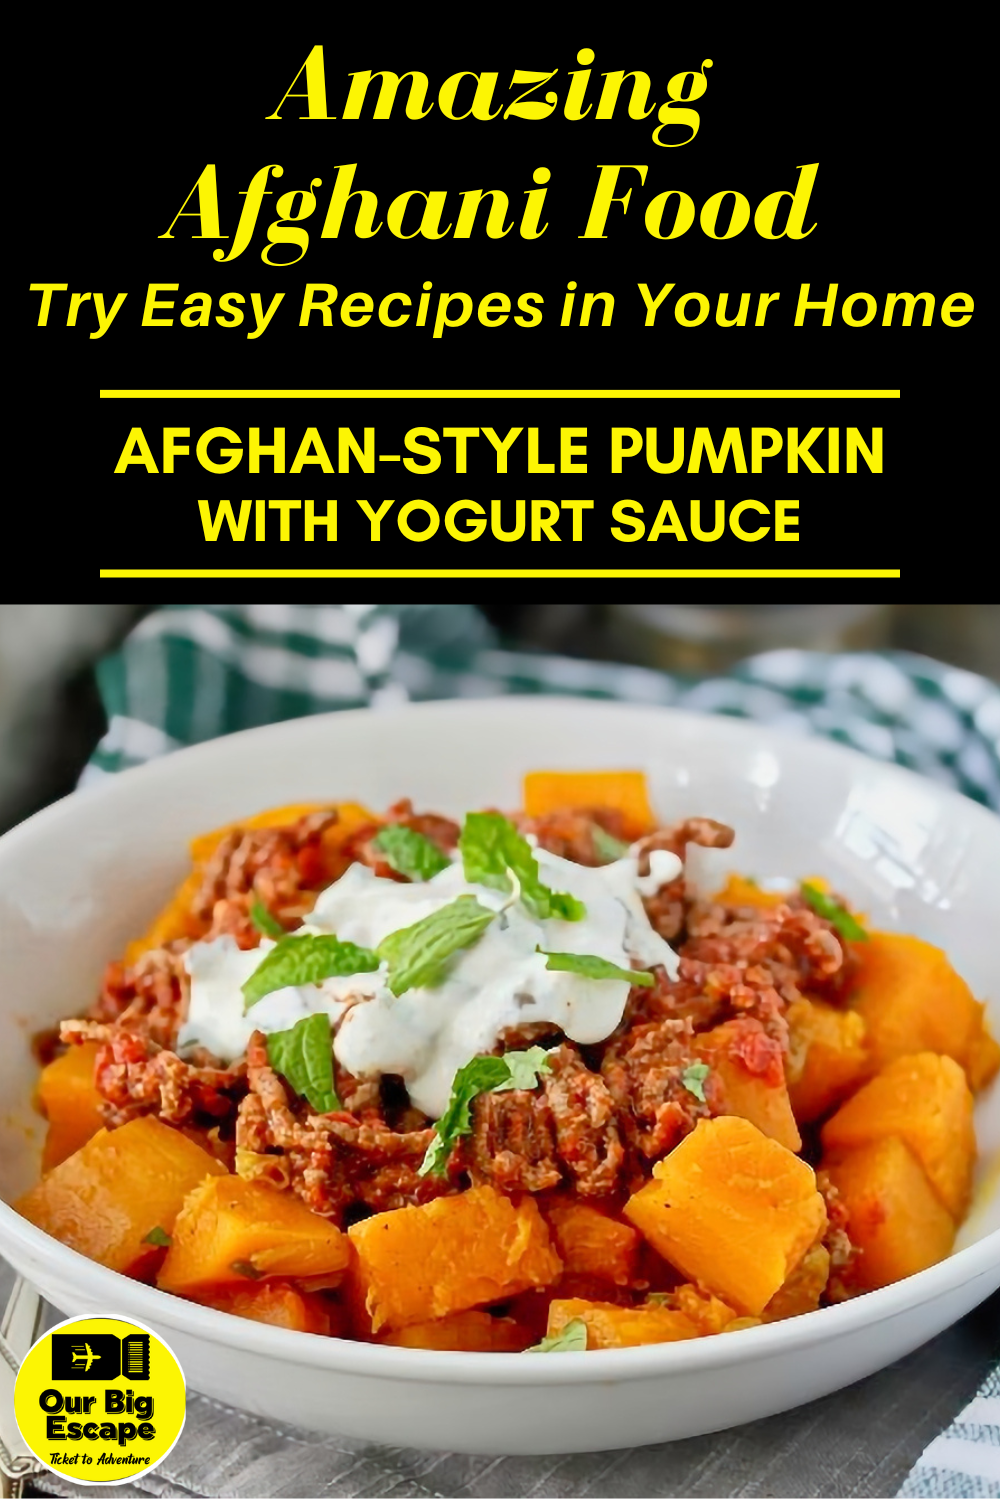 Afghan-Style Pumpkin With Yogurt Sauce - 16 Amazing Afghani Food Try Easy Recipes in Your Home